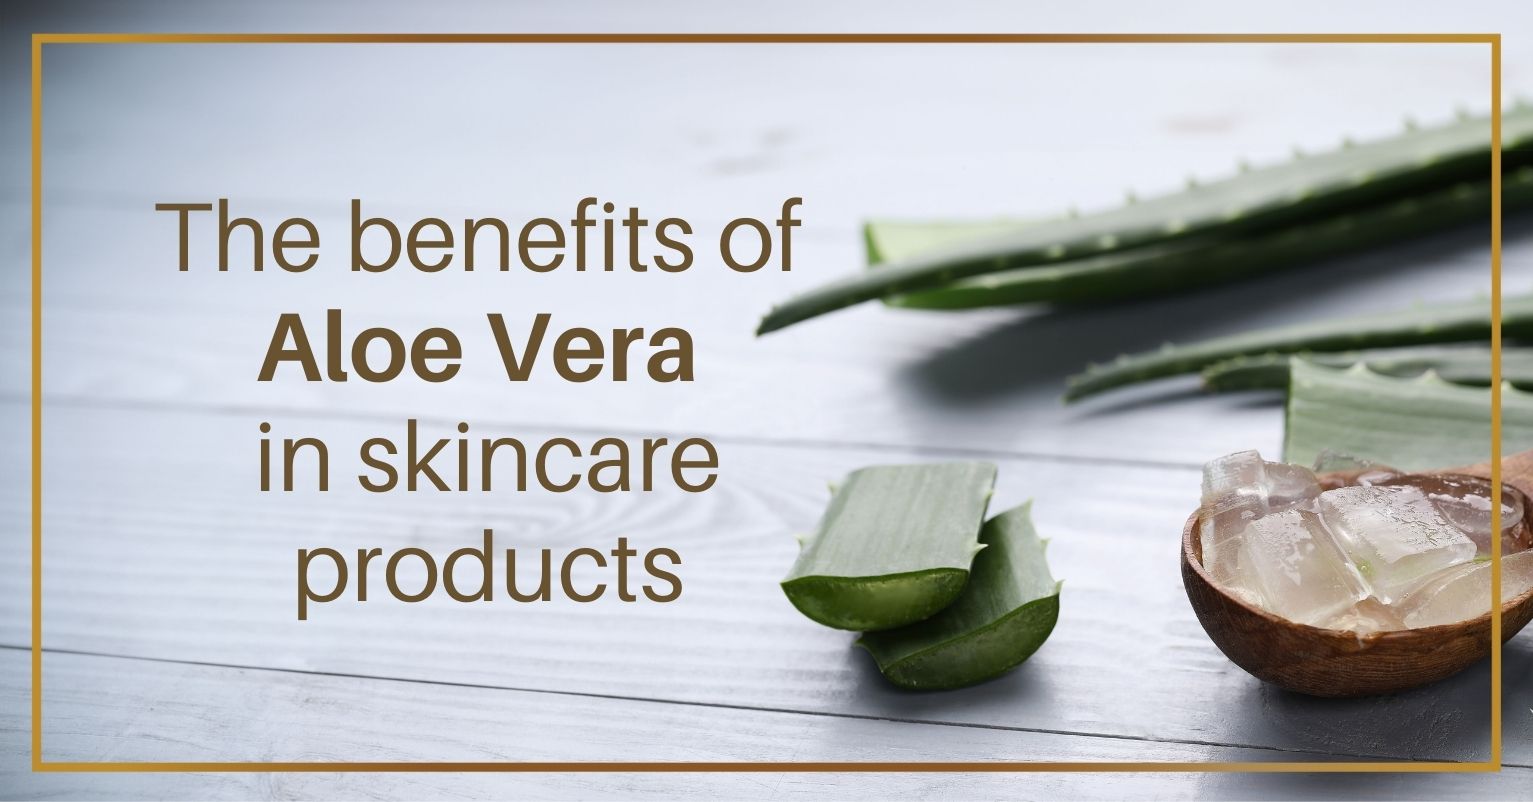 Top 7 Benefits of Aloe Vera in Skincare products